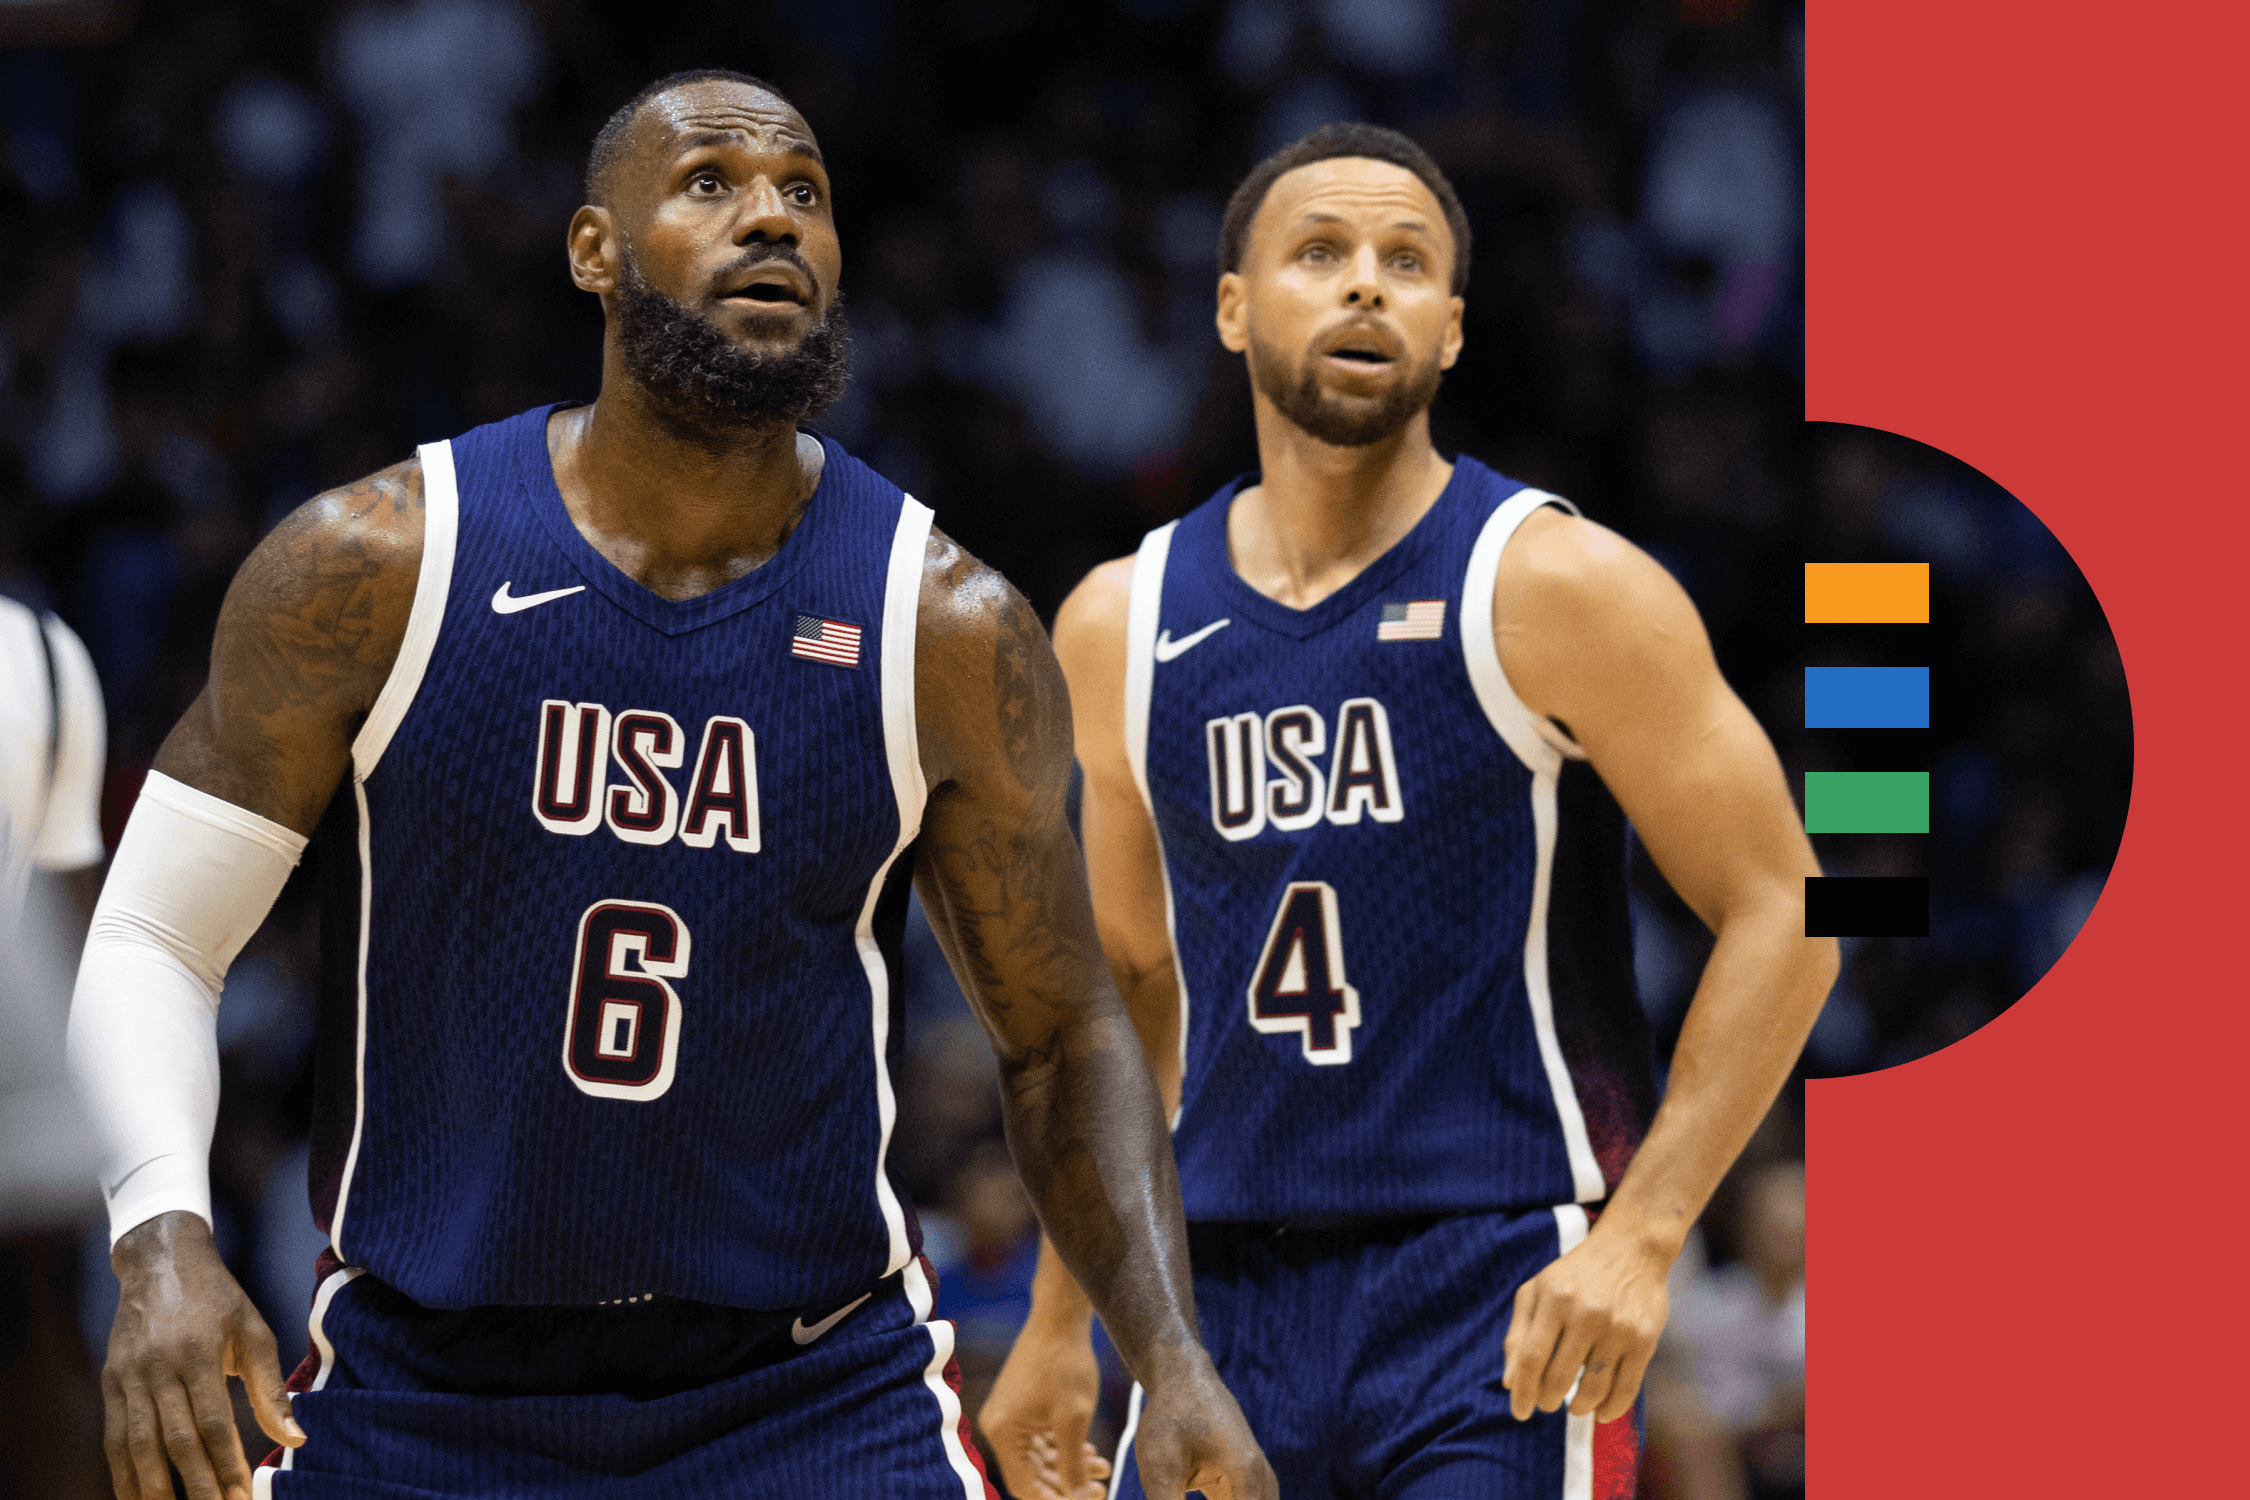 Dream Team dreaming: How great can this U.S. men's basketball team still be?